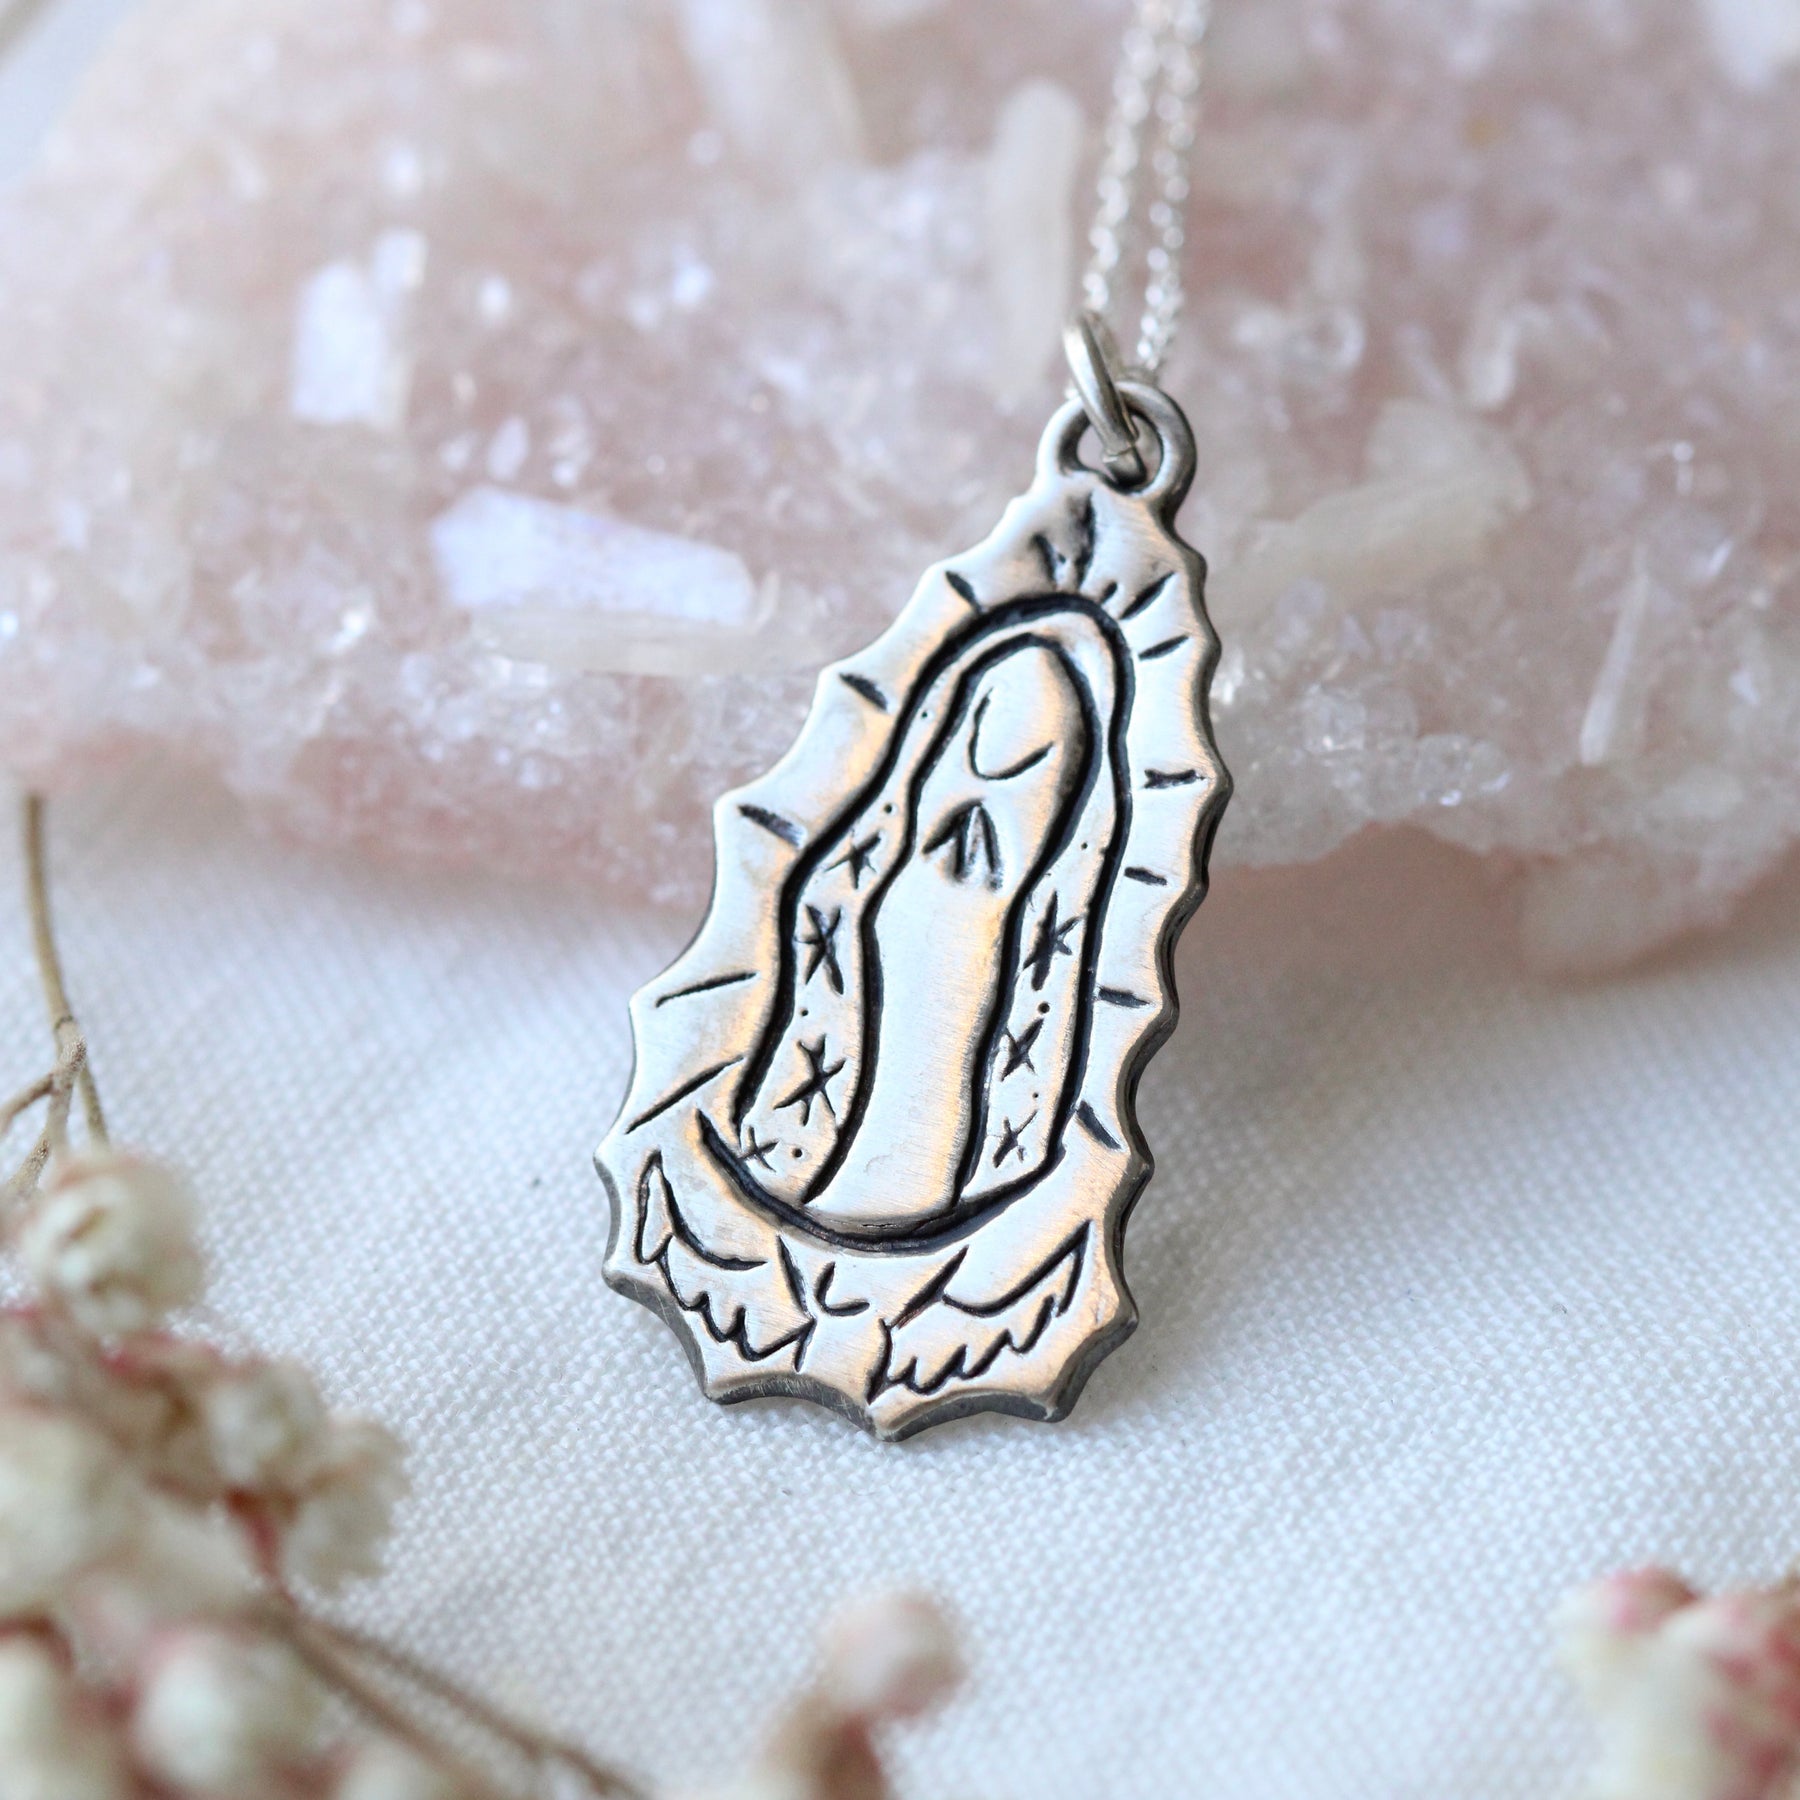 Our Lady of Guadalupe Marian Medallion necklace